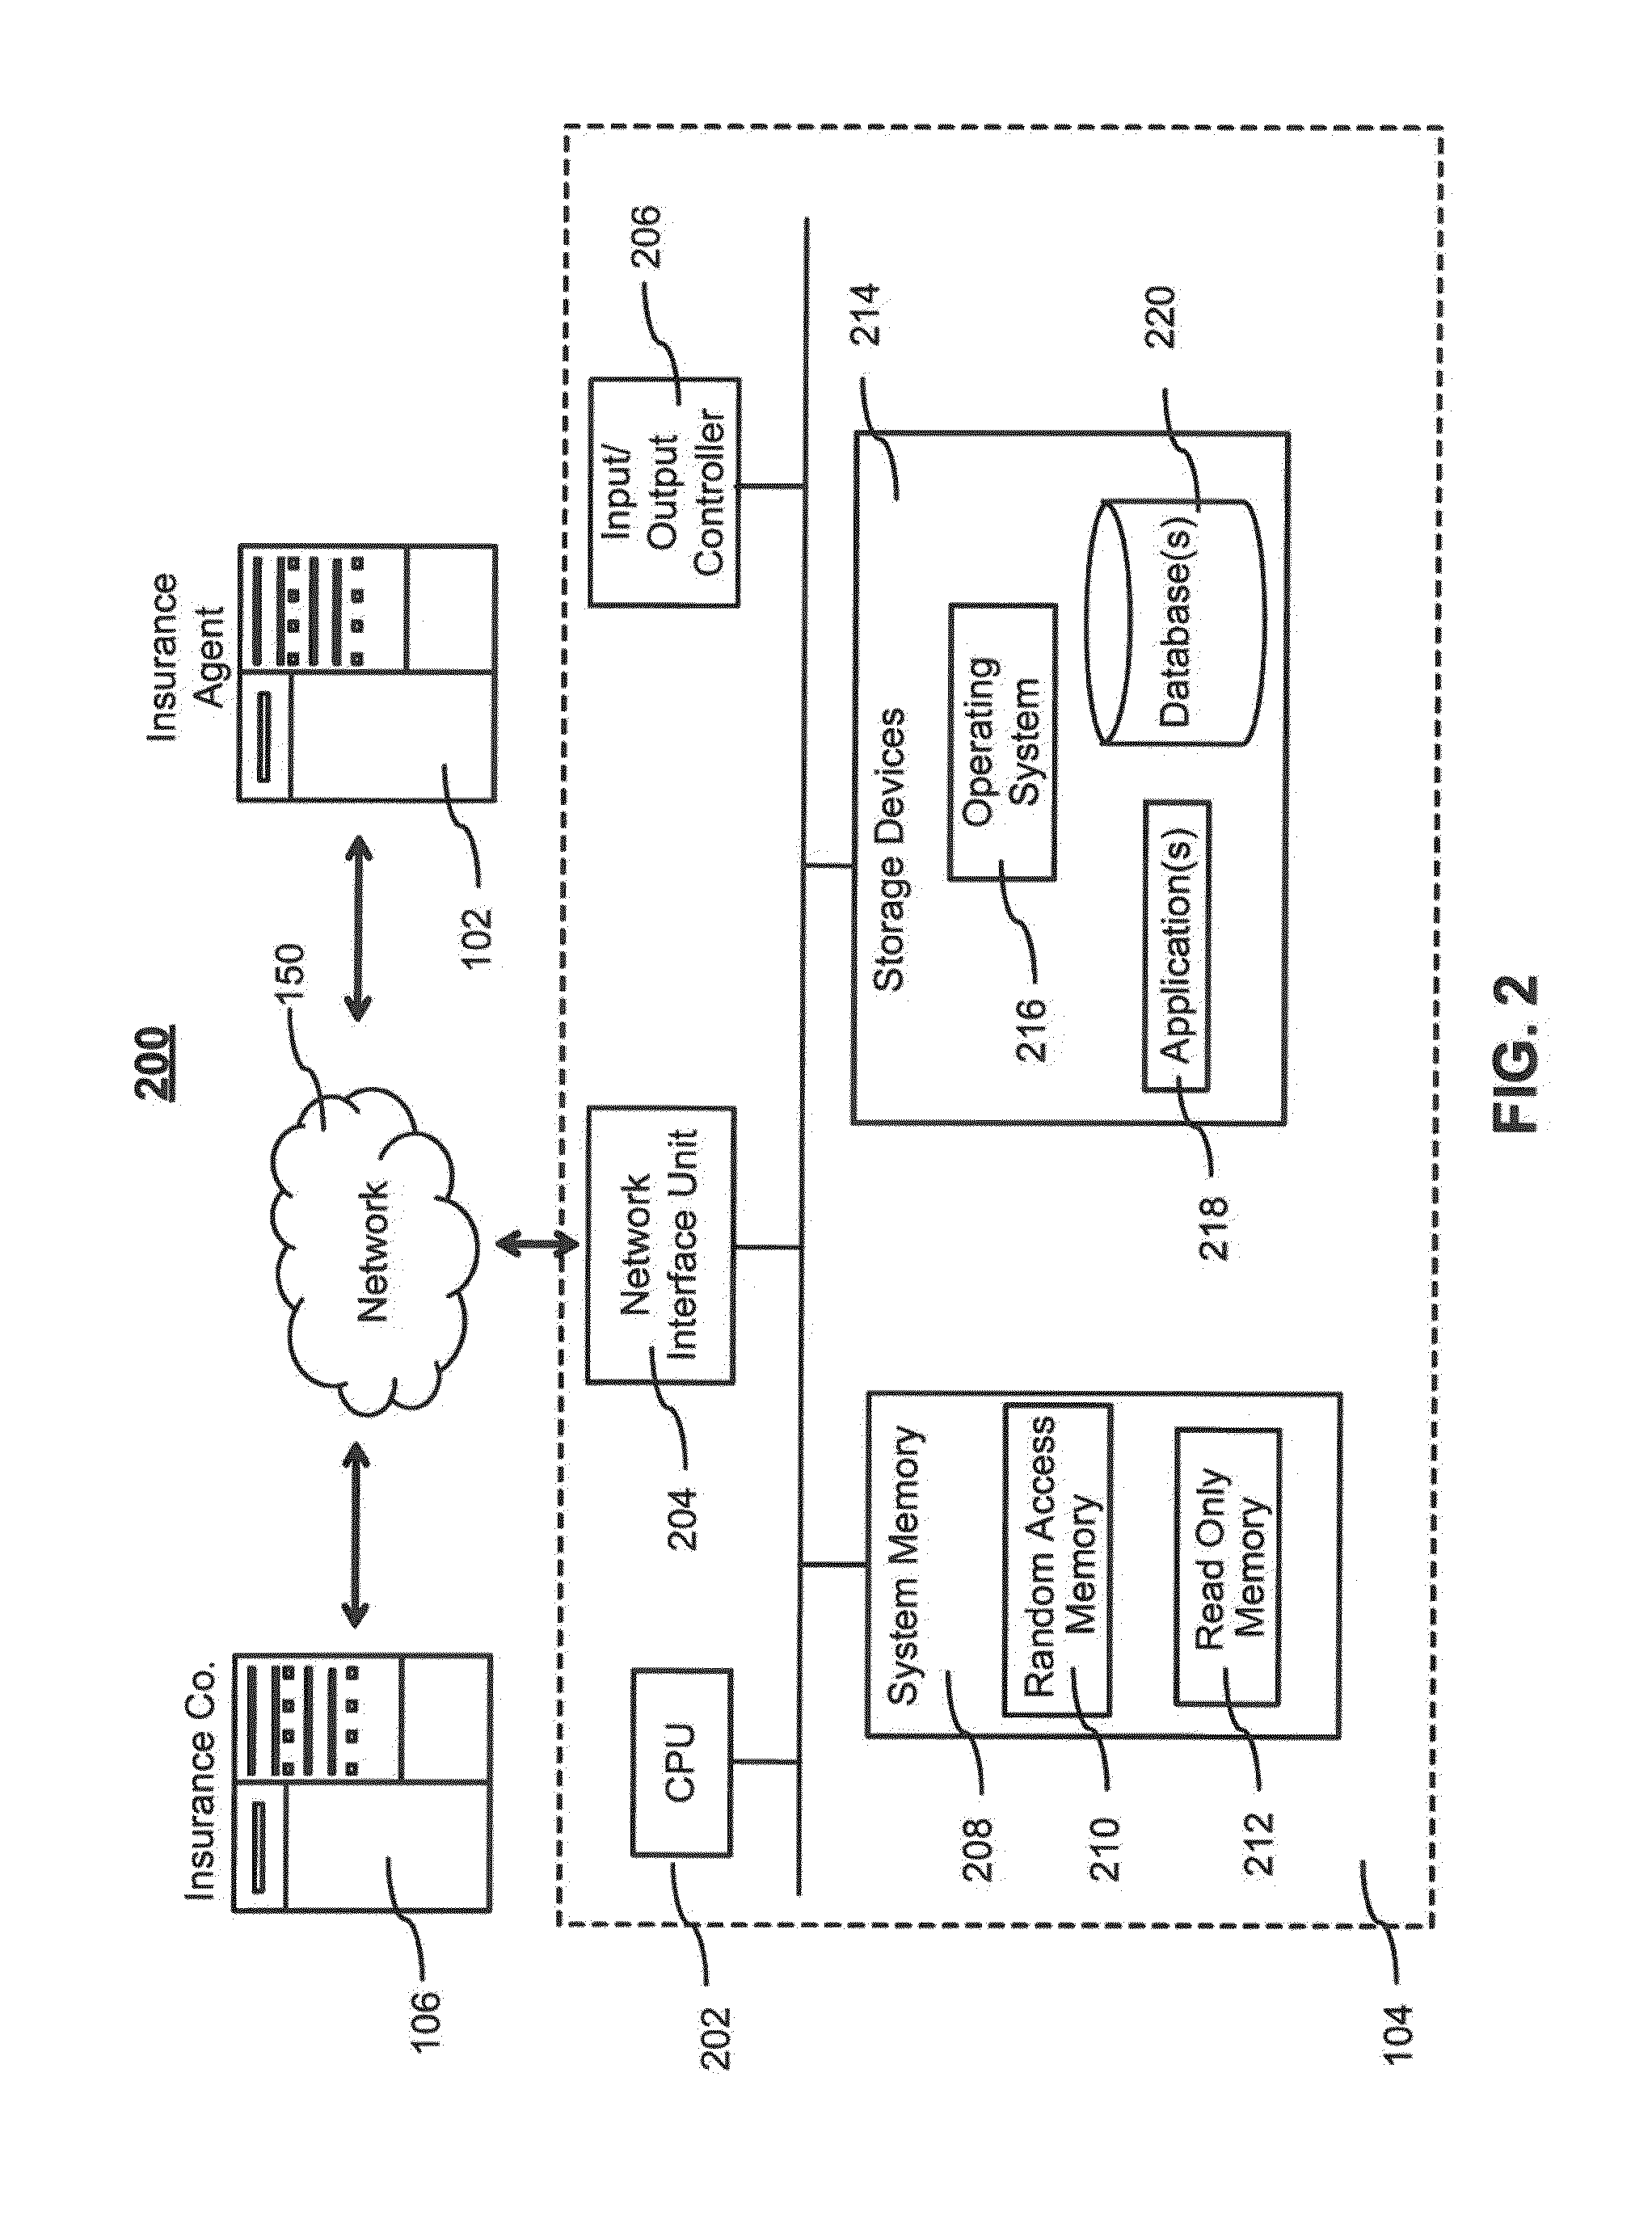 Computerized System and Method for Pre-Filling of Insurance Data Using Third Party Sources